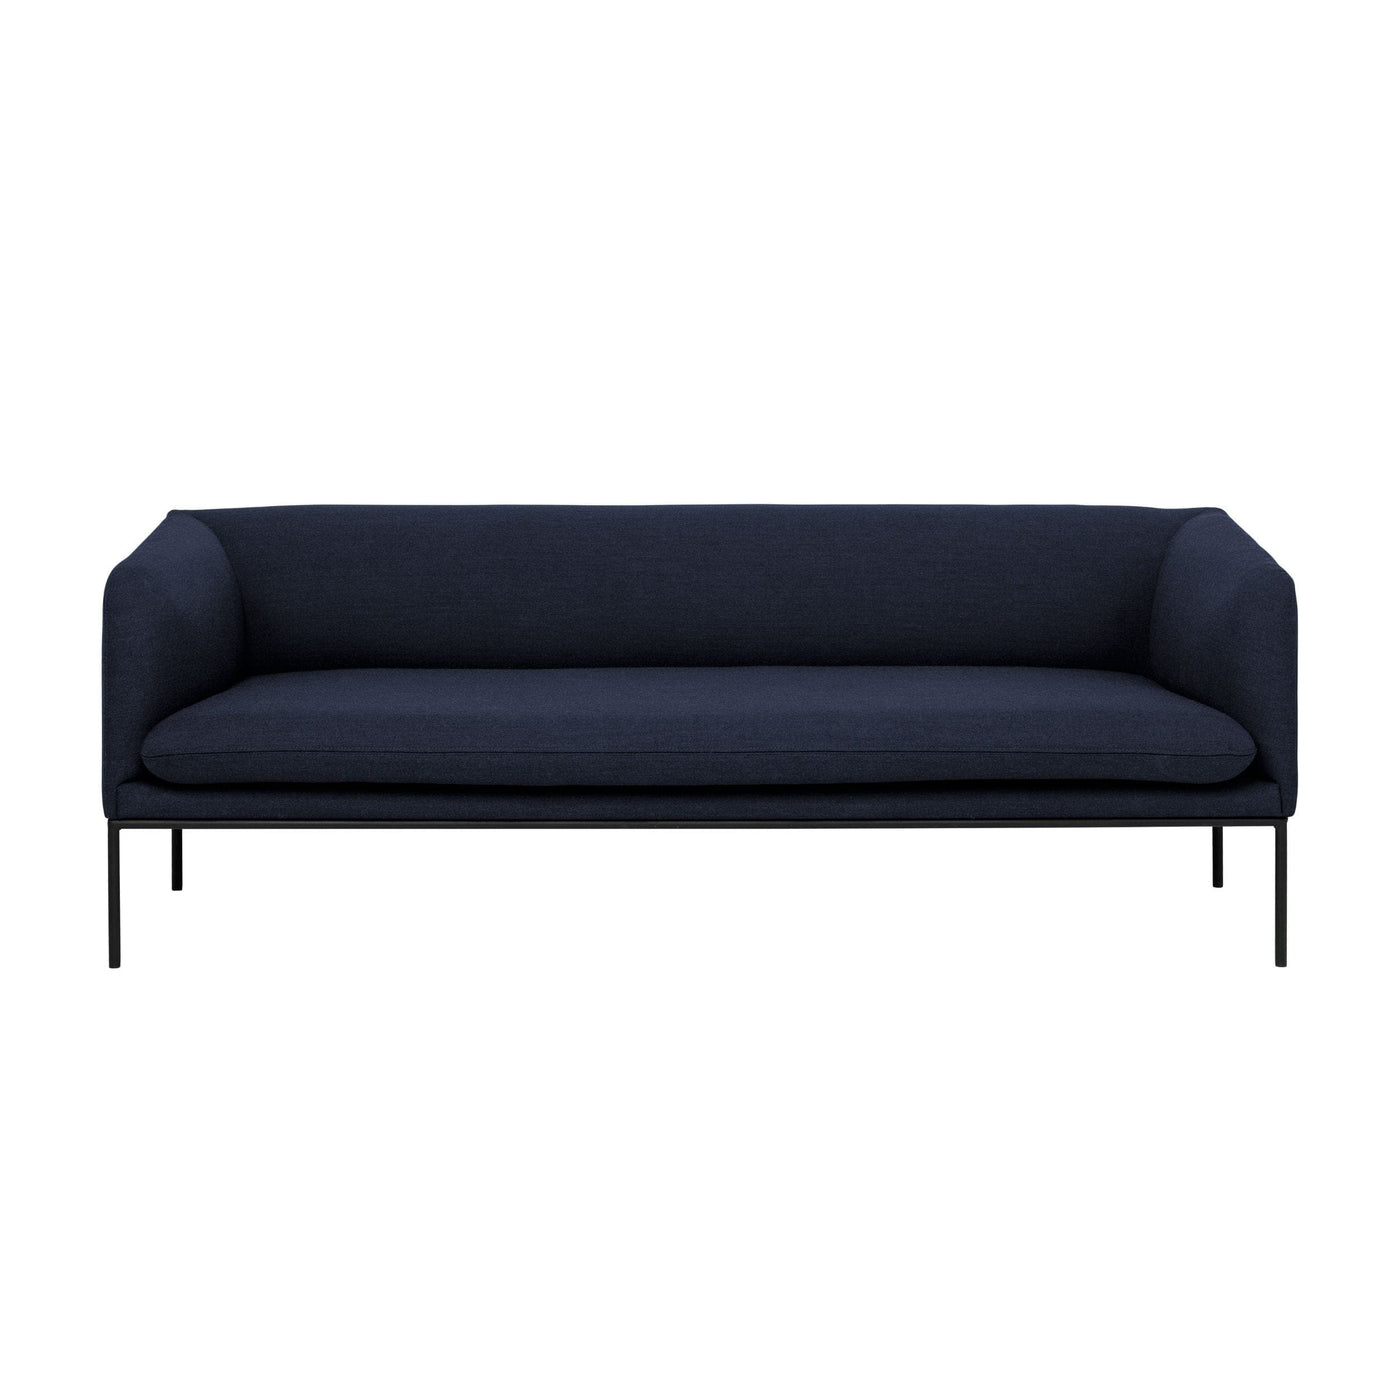 ferm living turn 3 seater dark blue fiord by kvadrat sofa. Available from someday designs. #colour_dark-blue-fiord-by-kvadrat